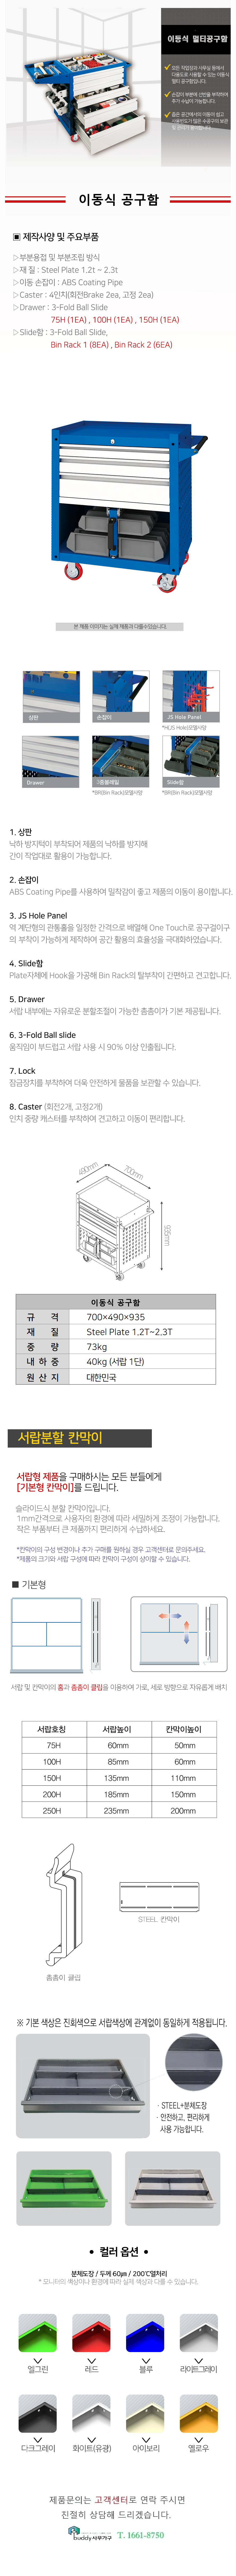 ntp-s01_2_product1693968295 - 복사본.png